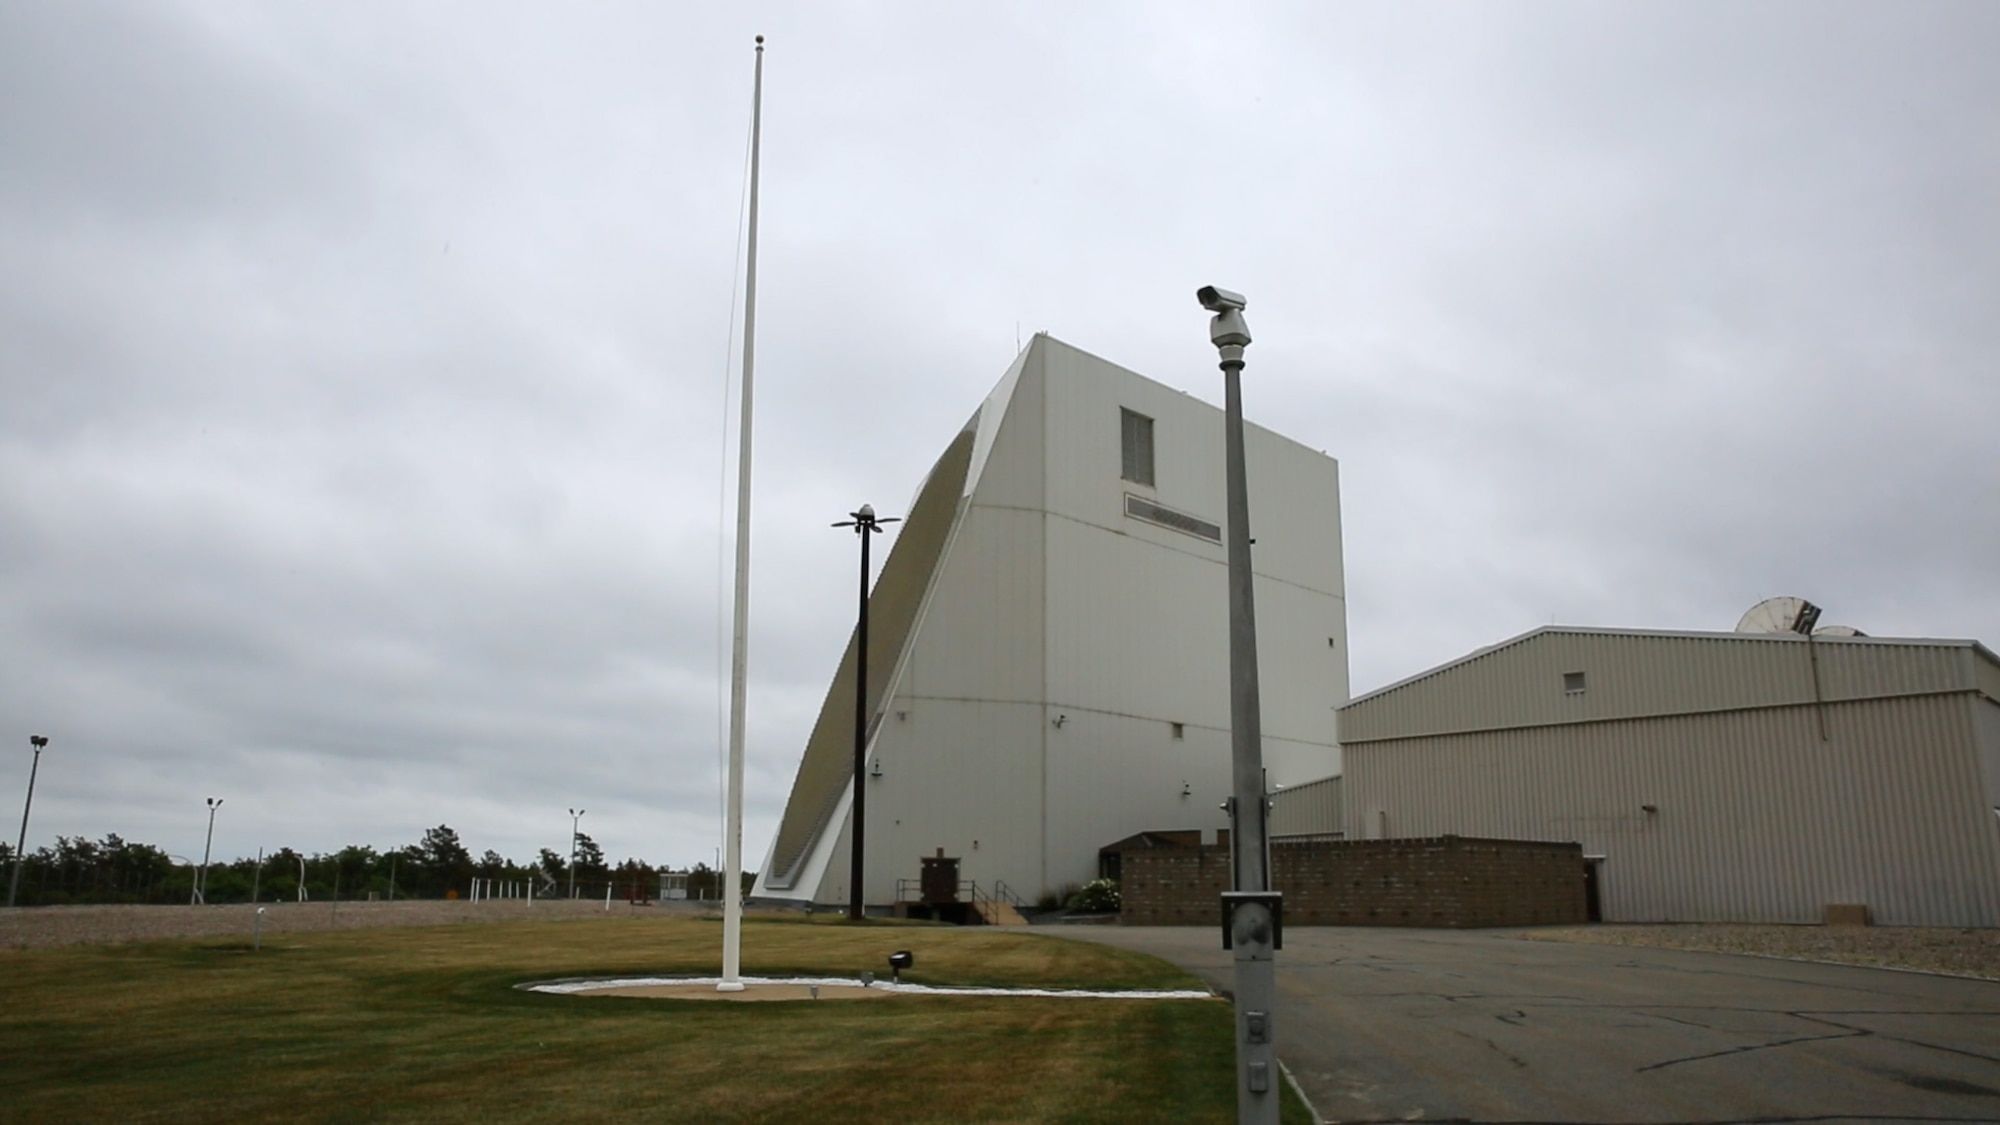 The Phased Array Warning System, called PAVE PAWS, at Joint Base Cape Cod, Mass., operates 24 hours a day, 365 days a year, and has a 3,000-mile reach down the east coast and over the Atlantic Ocean. A wind turbine there provides 50 percent of the power needed to operate the system. (U.S. Air Force photo/Eddie Green/Released)